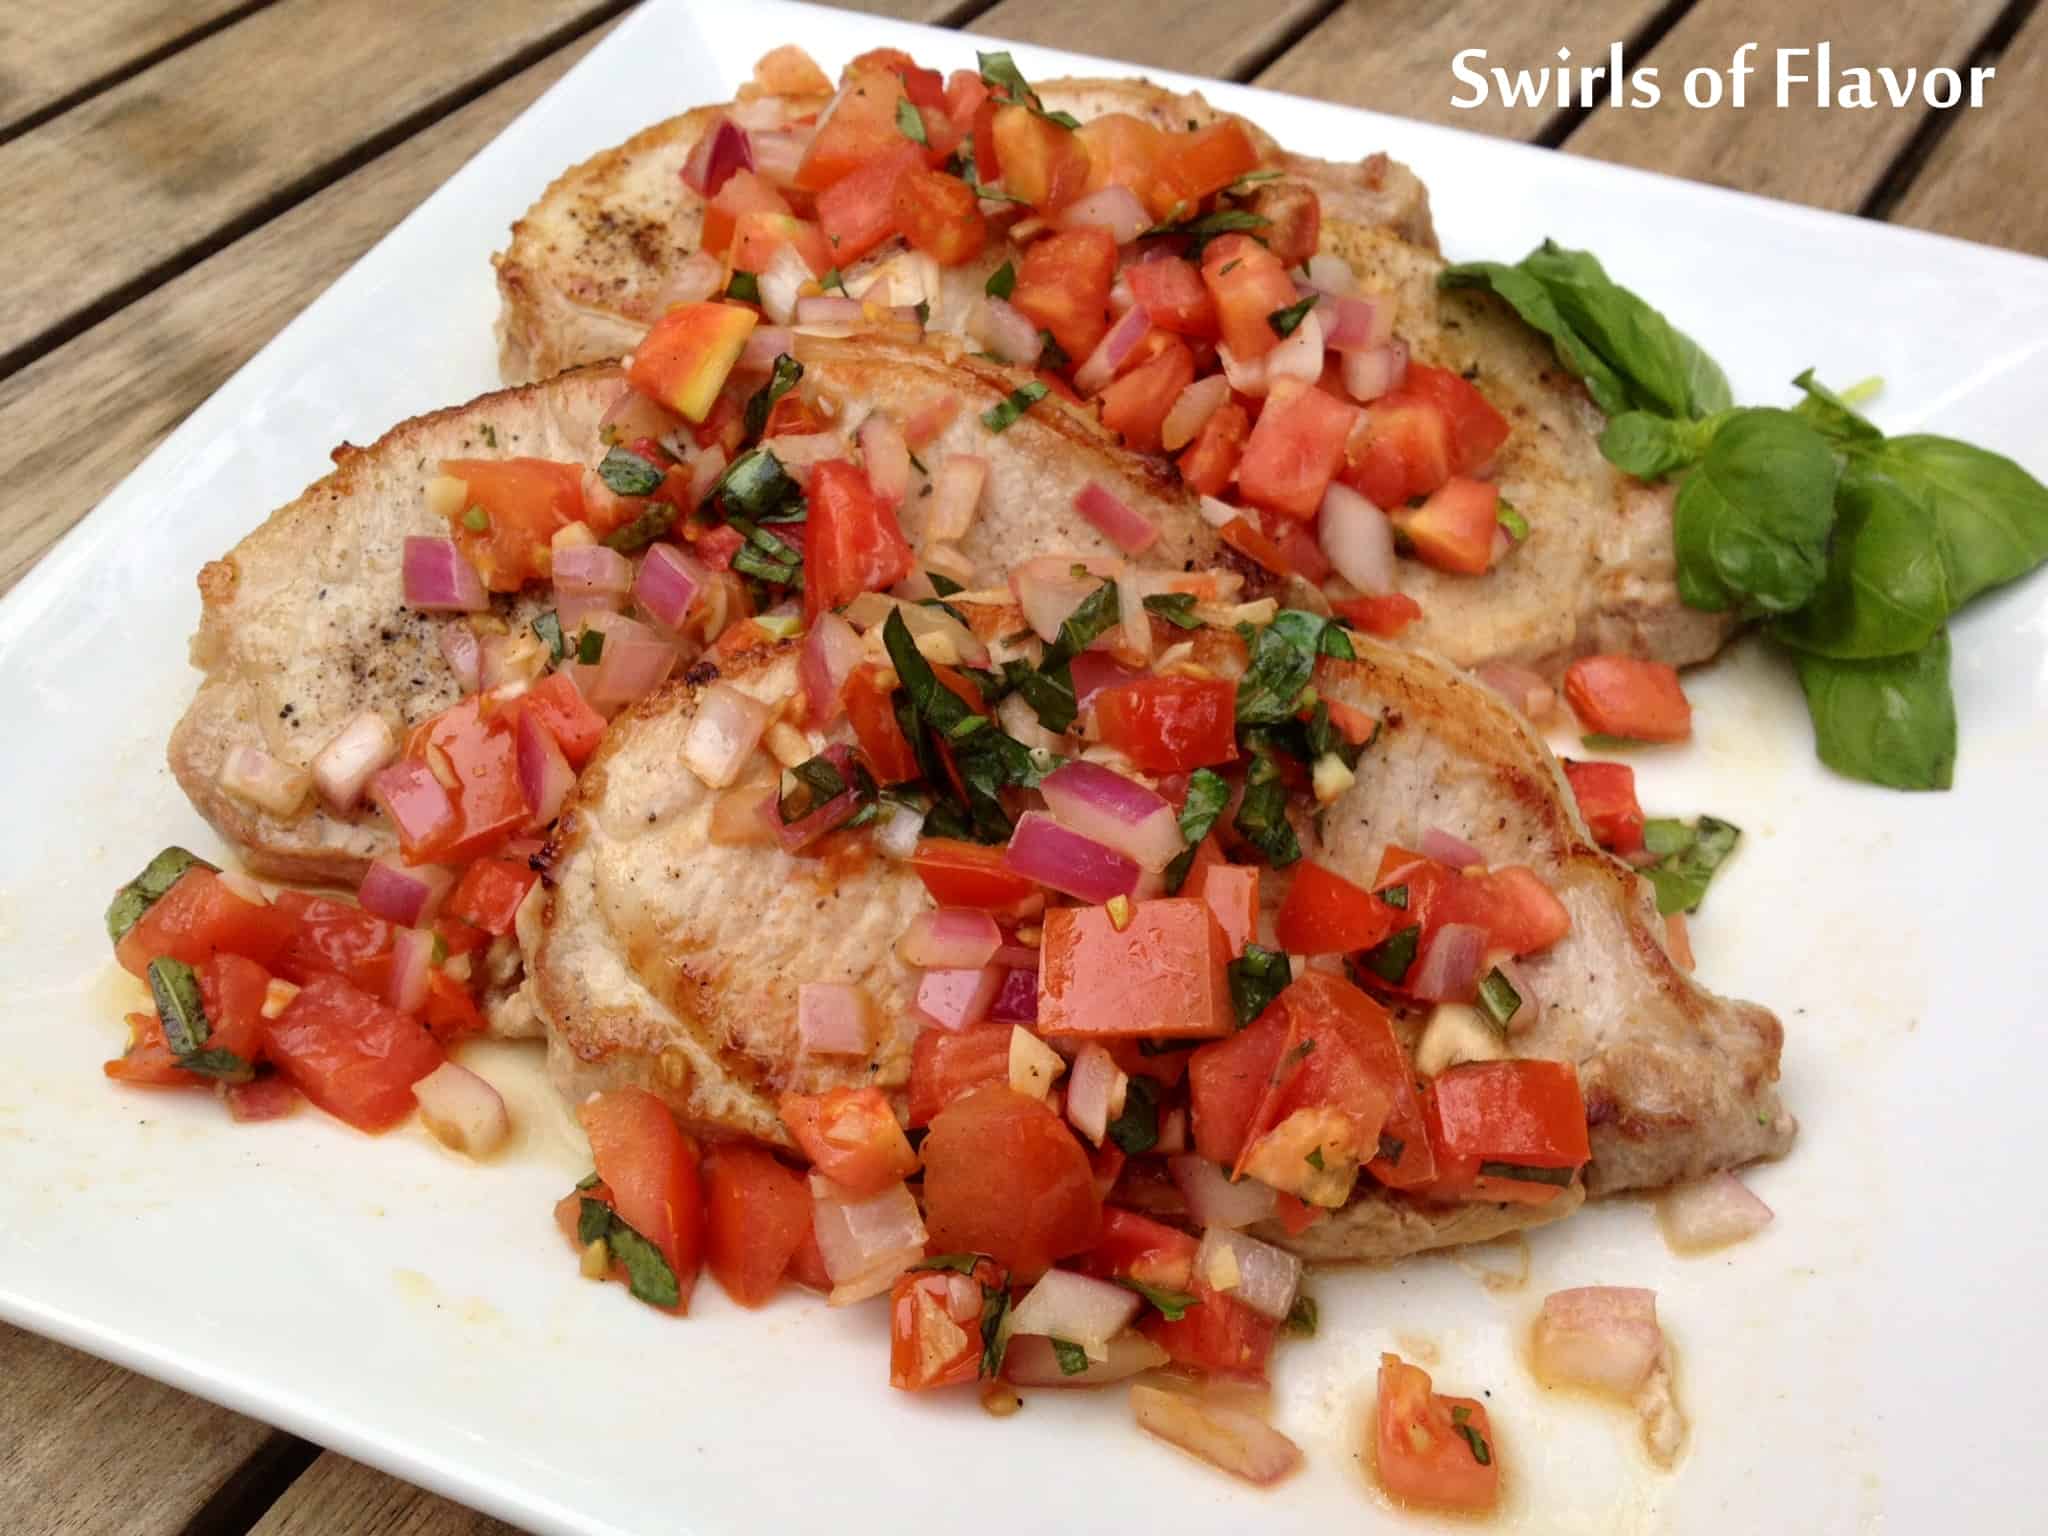 Pork chops with tomato and garlic.